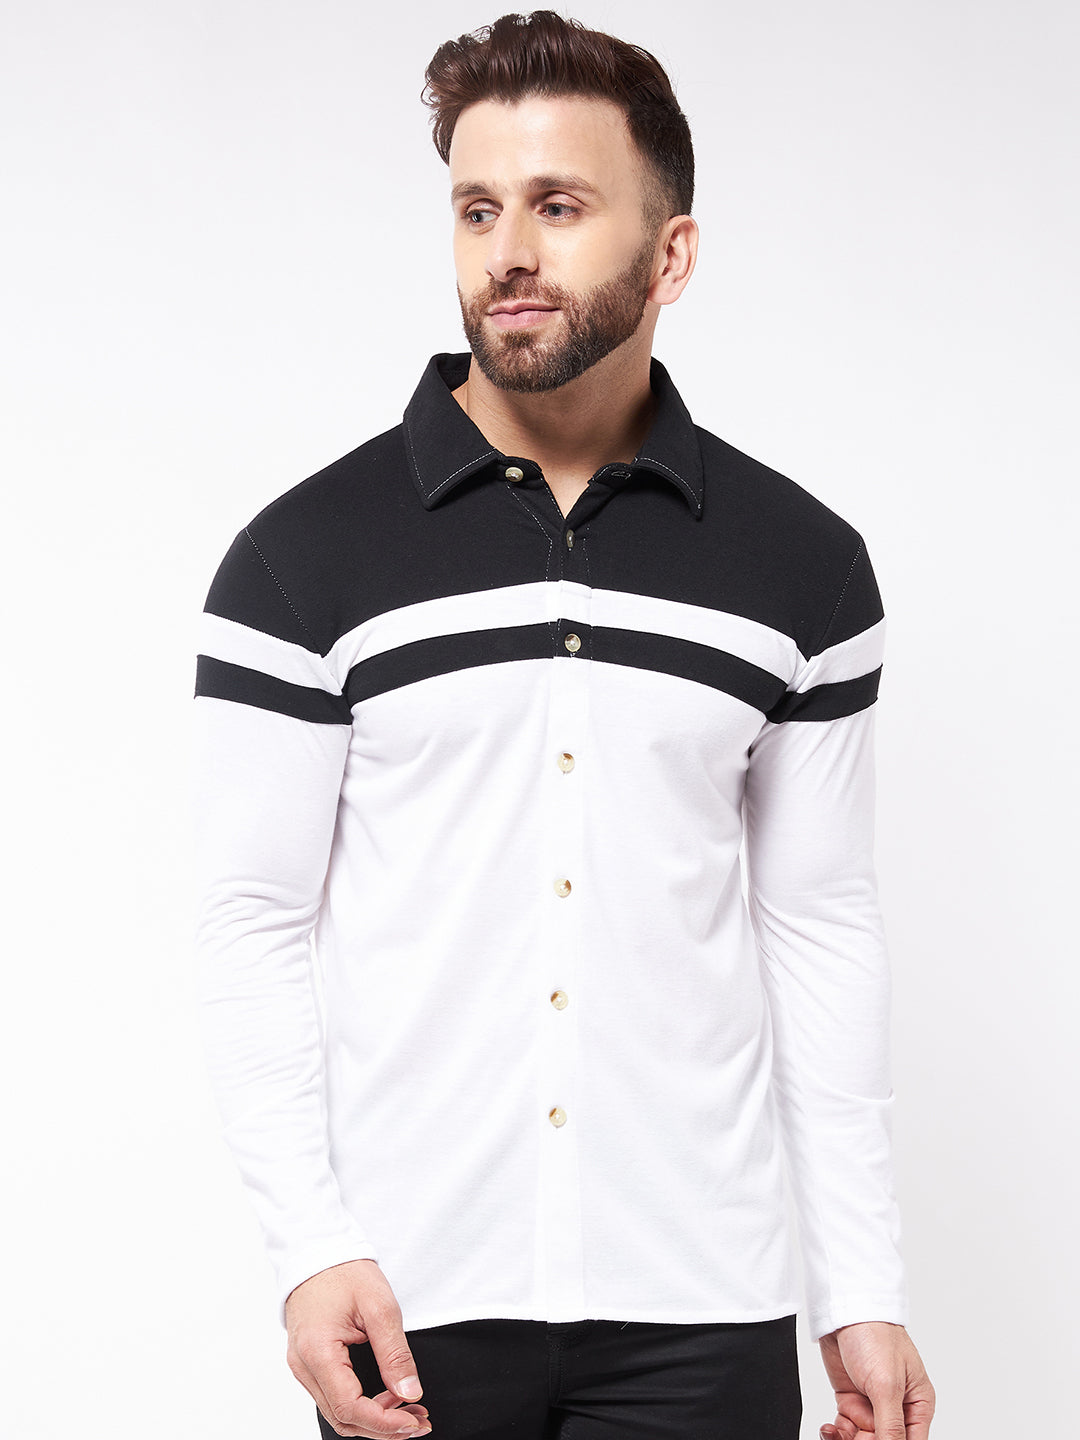 Black and White Color Block Full Sleeve Shirt